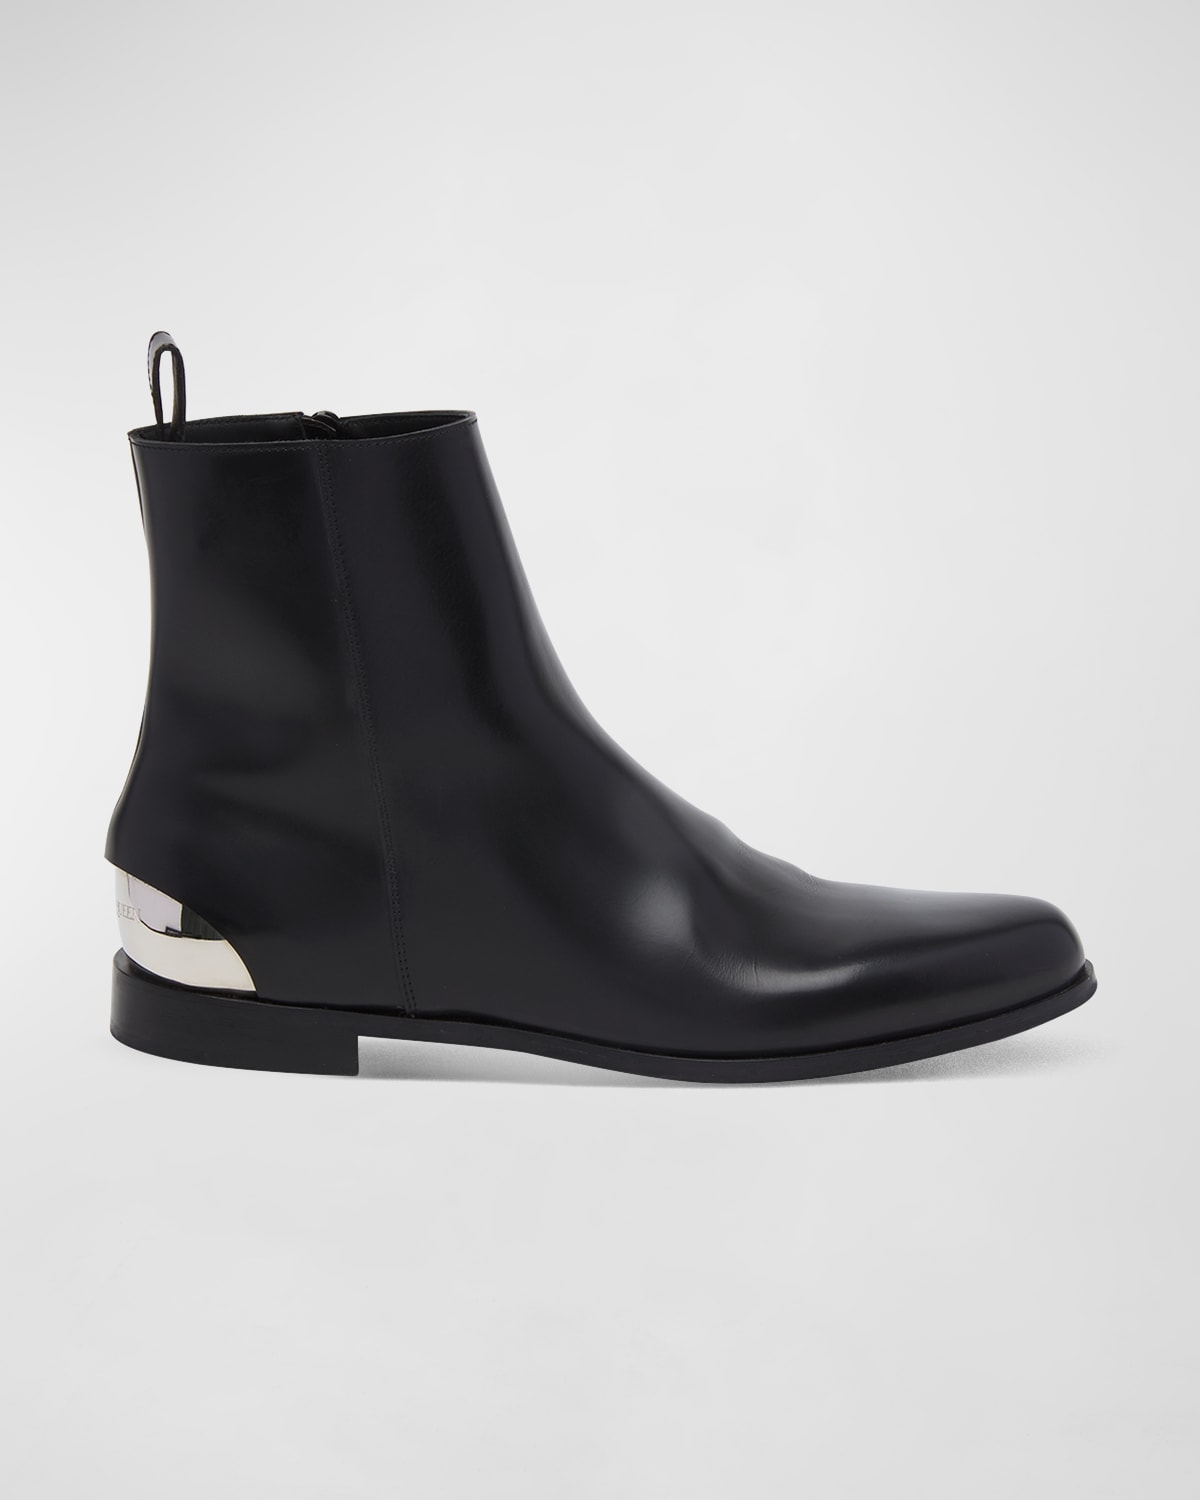 Men's Metal-Heel Leather Ankle Boots